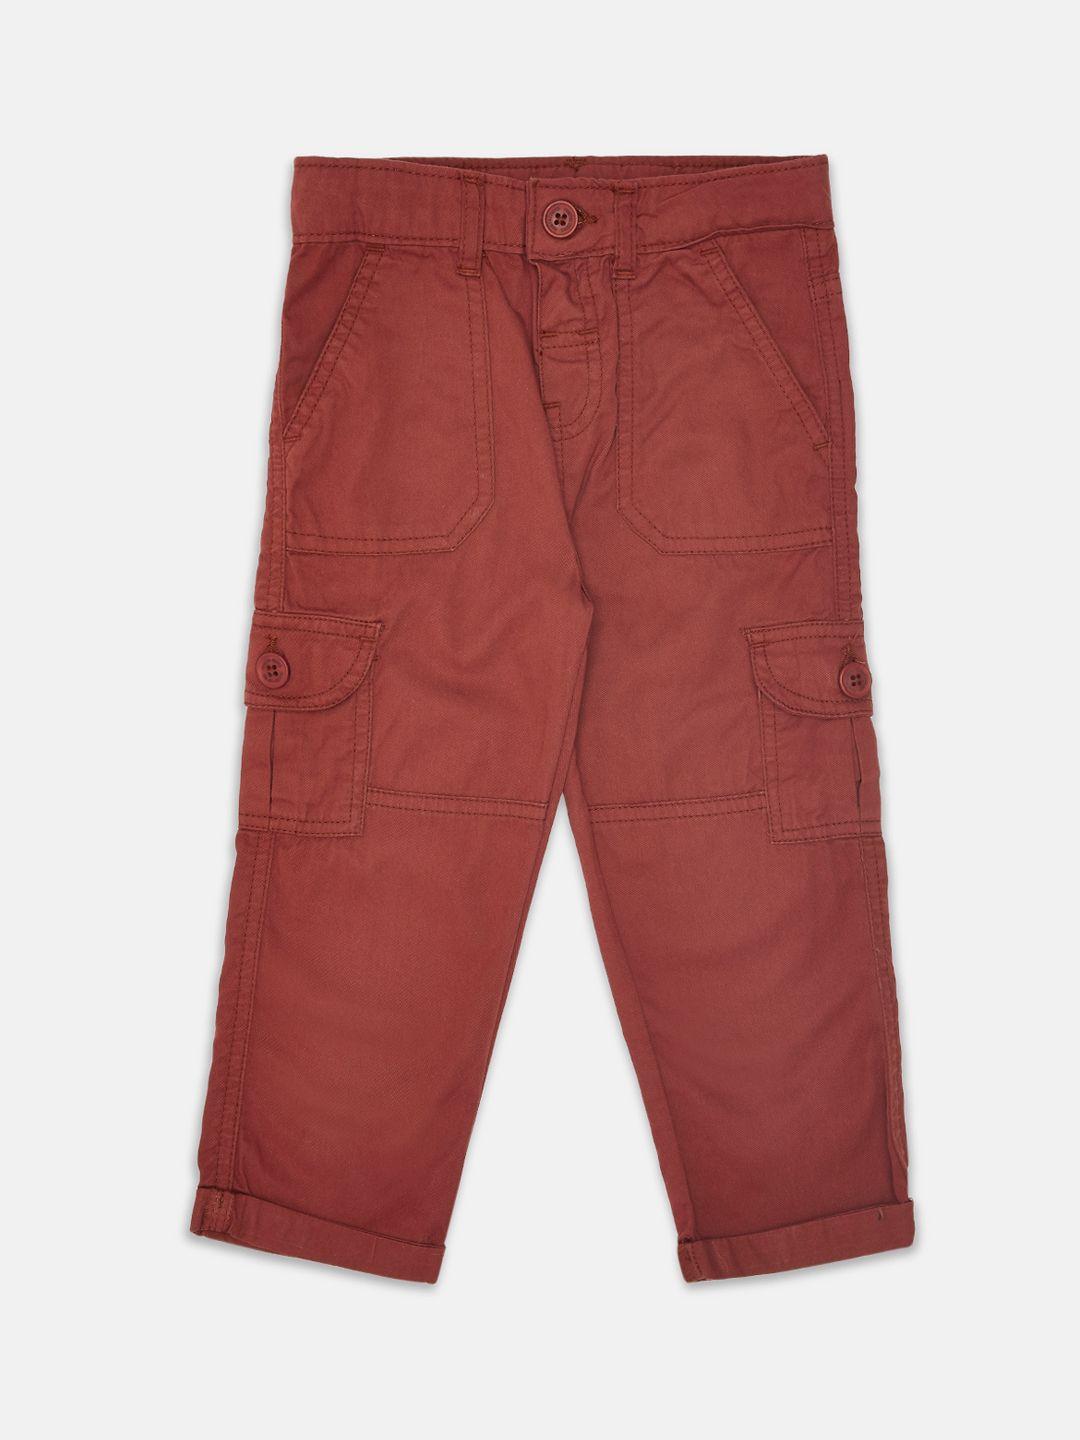 pantaloons baby boys rust red cotton cargos trousers